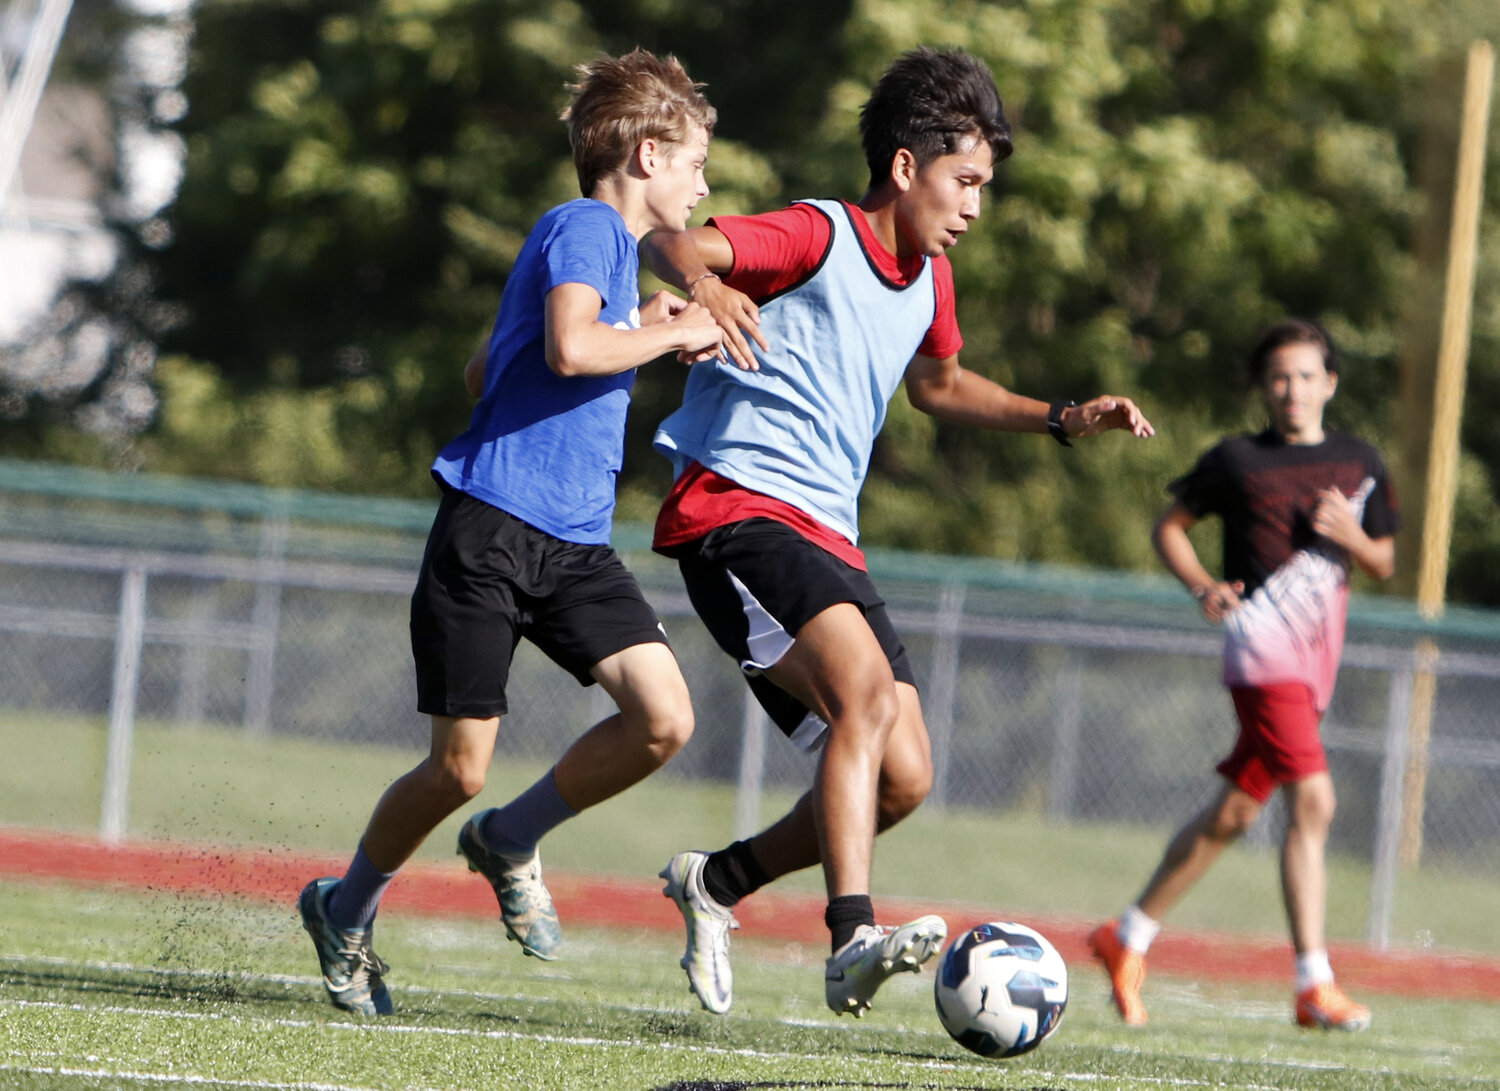 Warrenton senior Bryan Guerrero (right) gains control of the ball during an August practice.